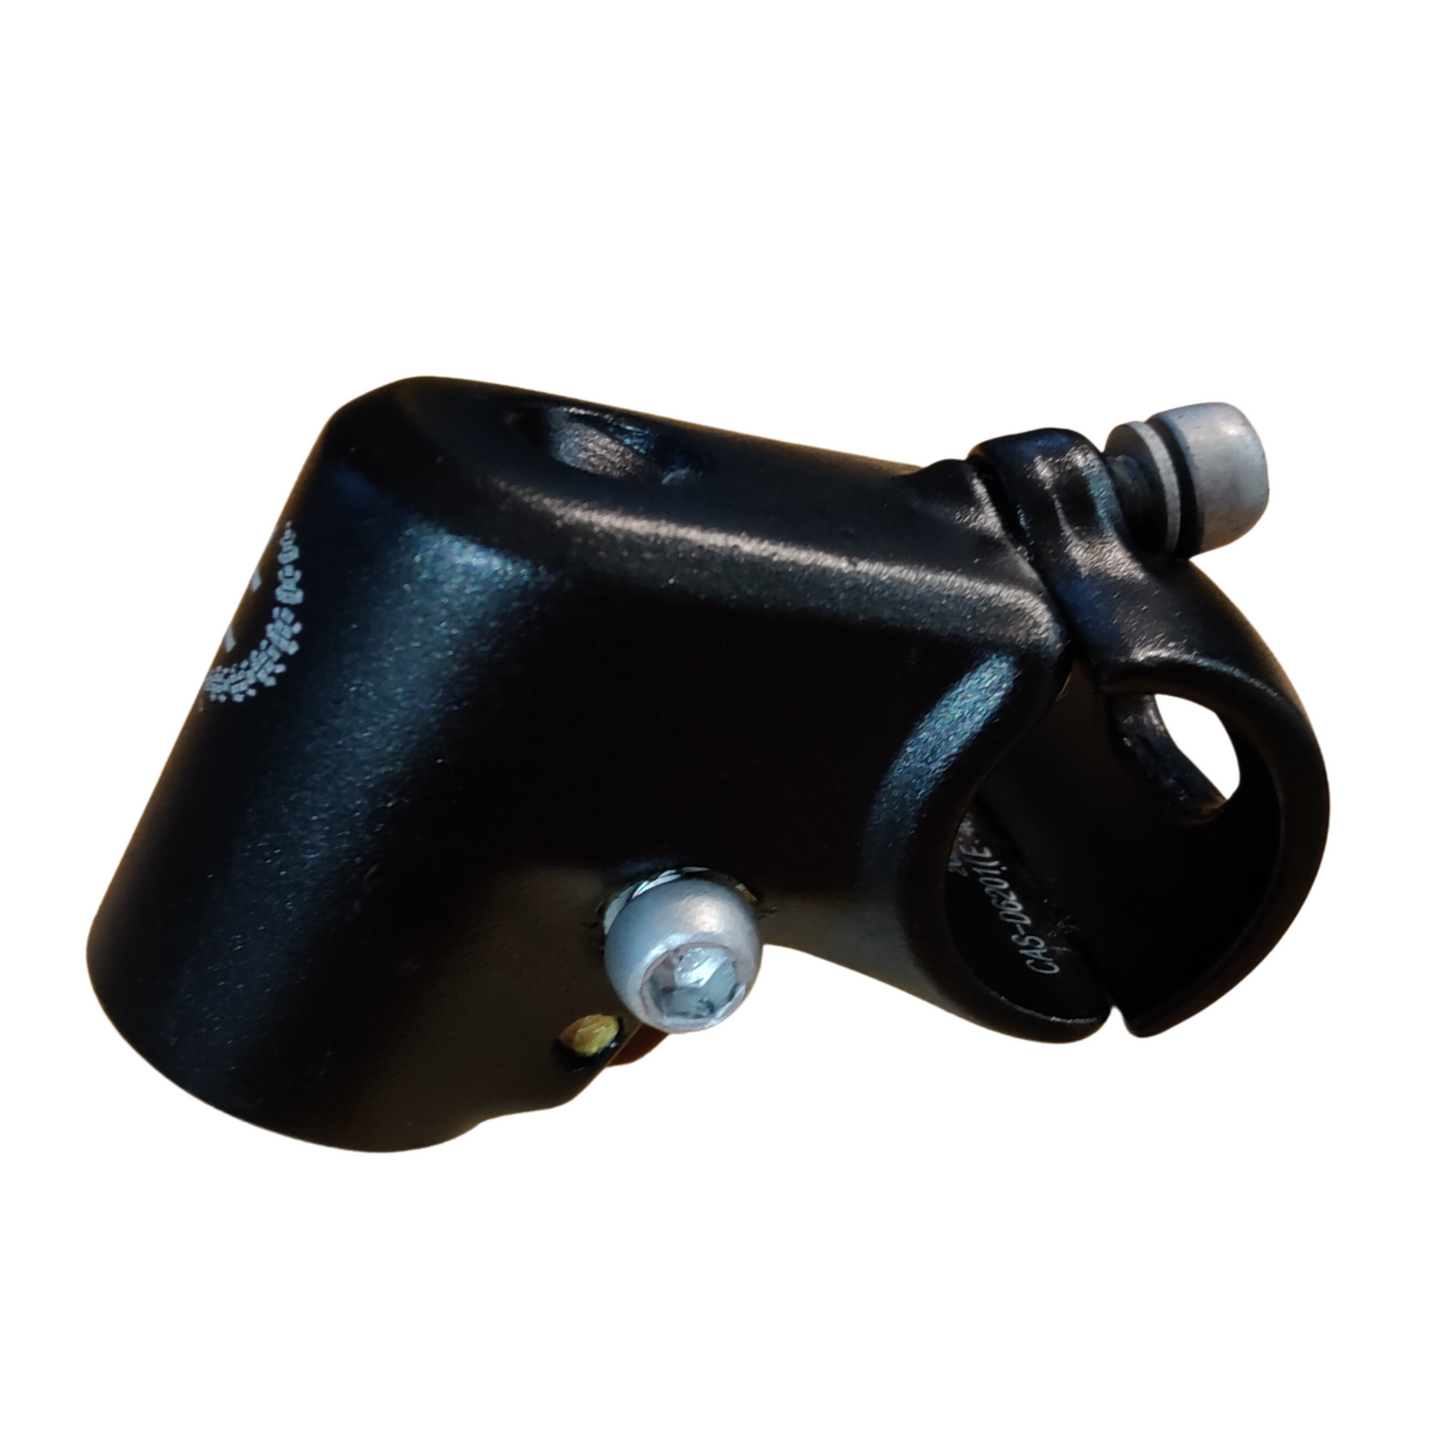 Traction S01 Stem (25.4 x 40mm, +/- 15 degrees)